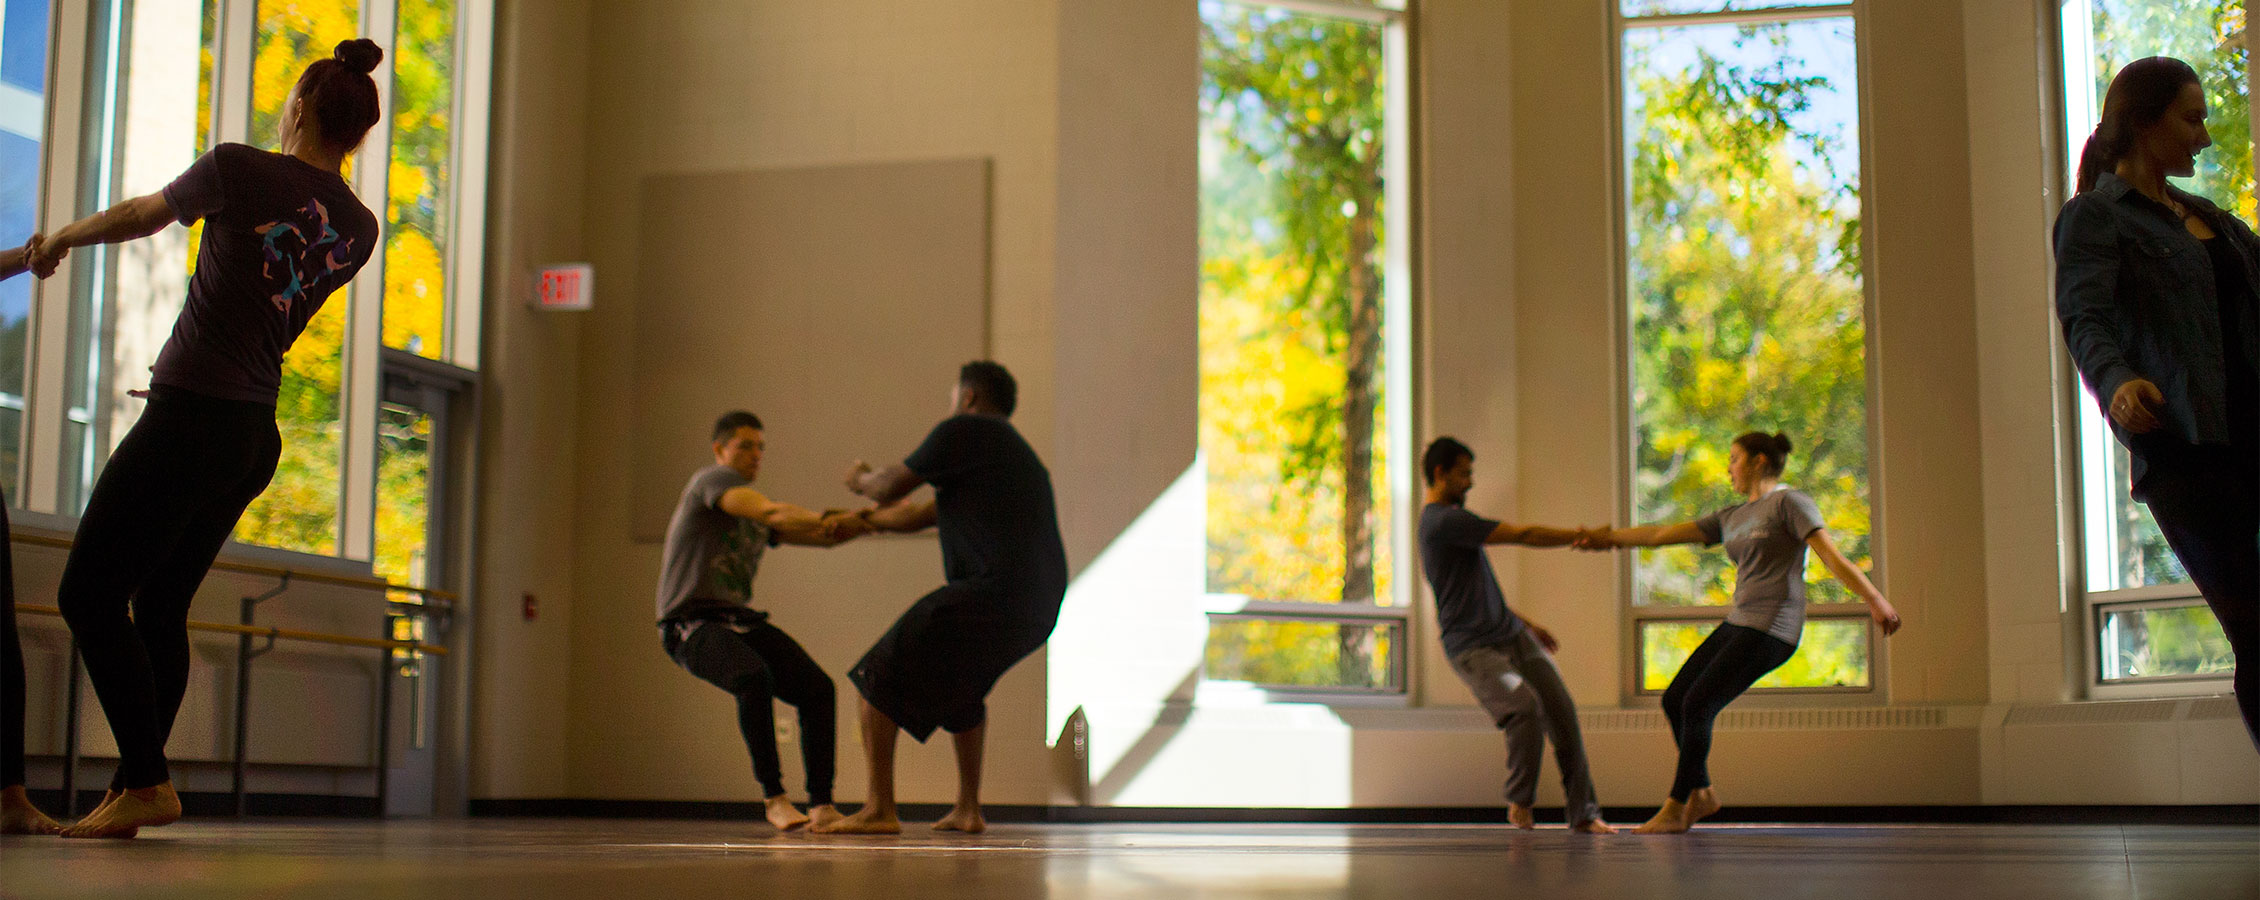 Dance majors at the University of Wisconsin Whitewater learn a new routine in pairs.